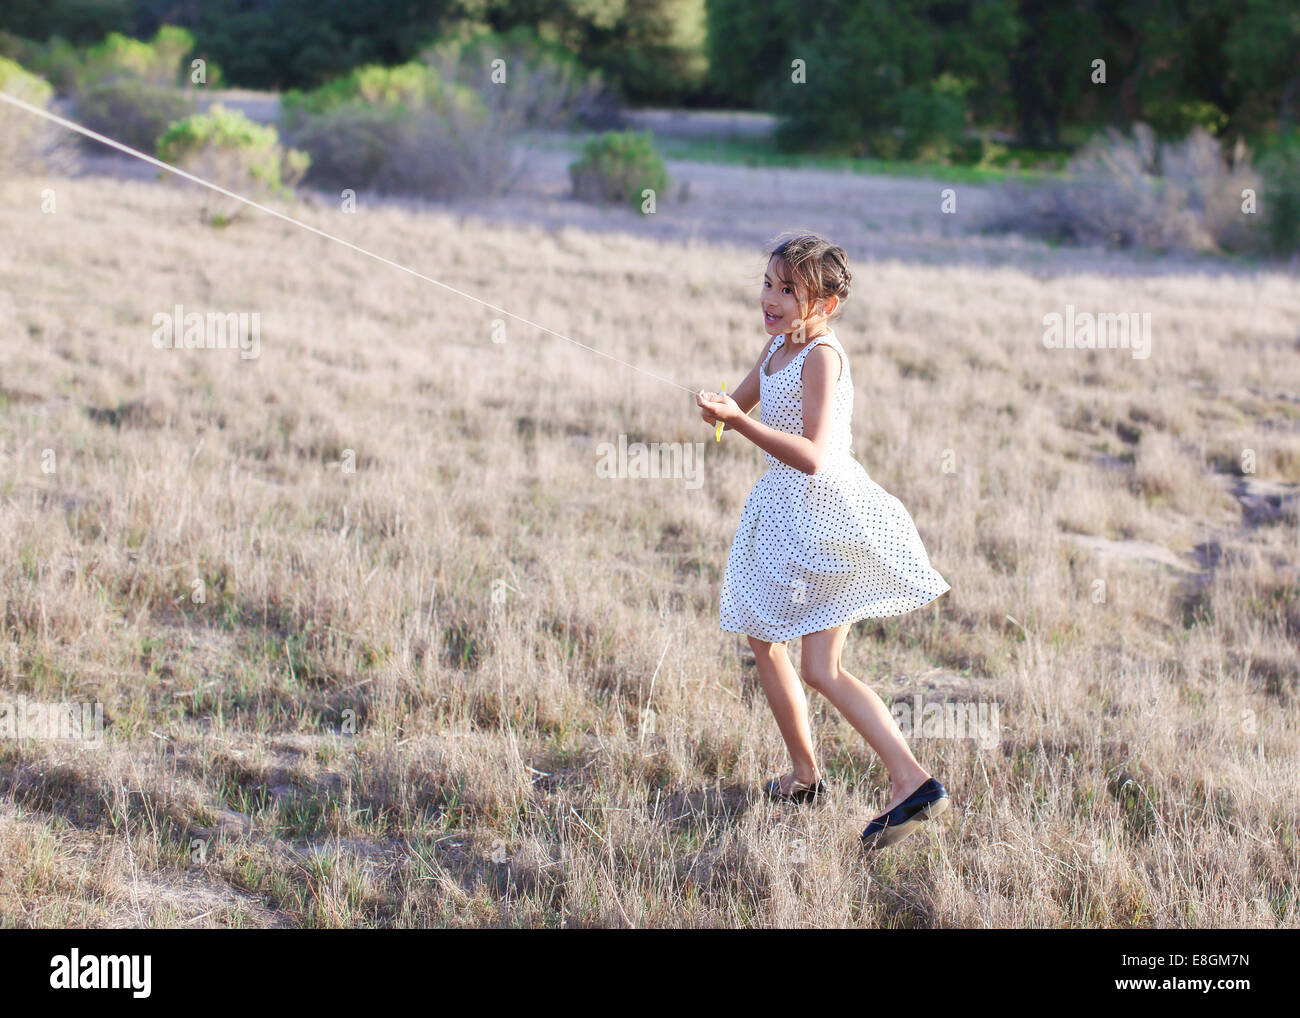 Girl flying a kite in the park Stock Photo